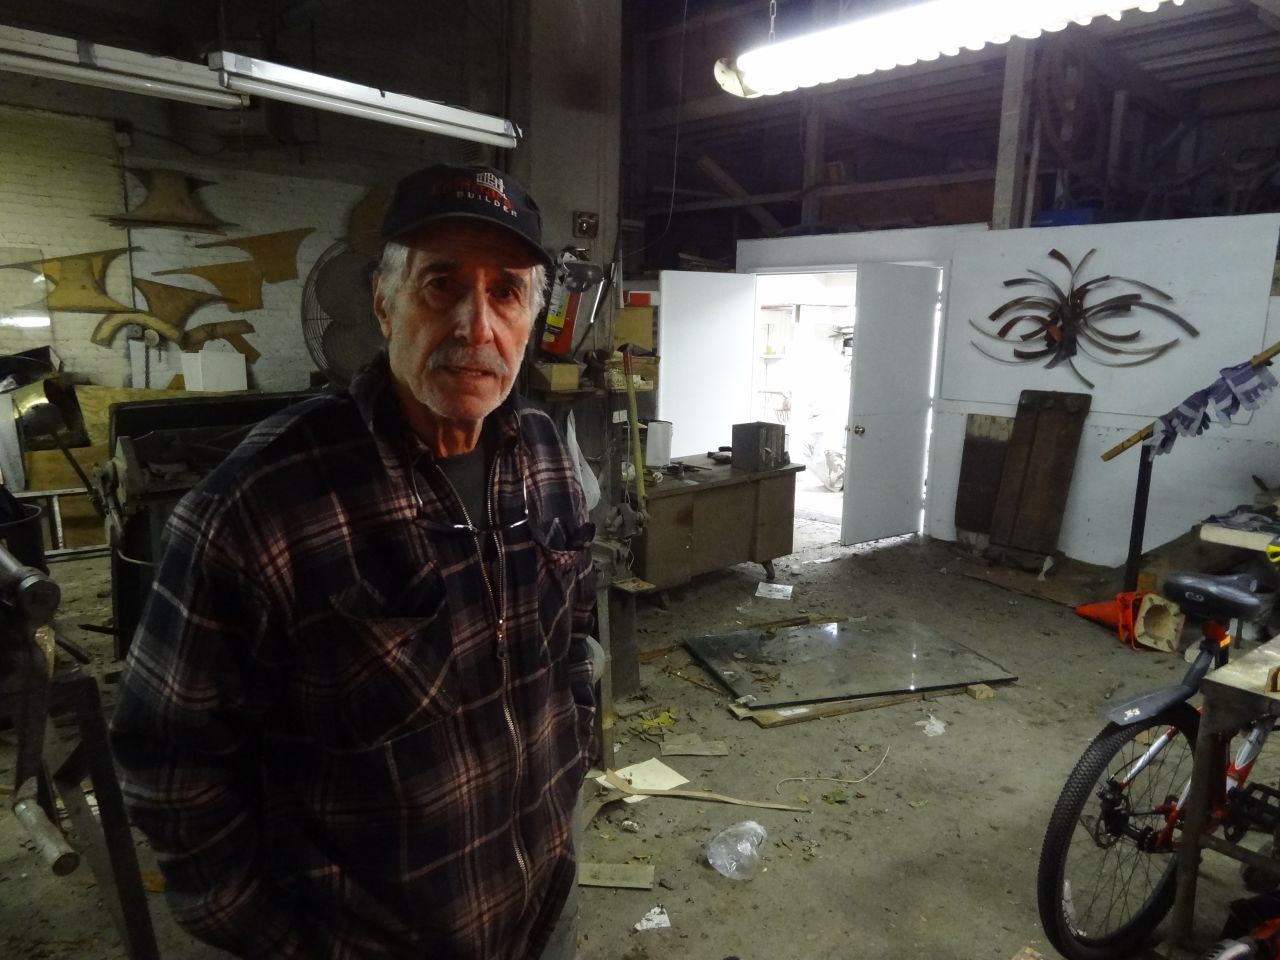 Artist and studio owner Silas Seandel works to restore his facility after floodwaters broke through his doors.